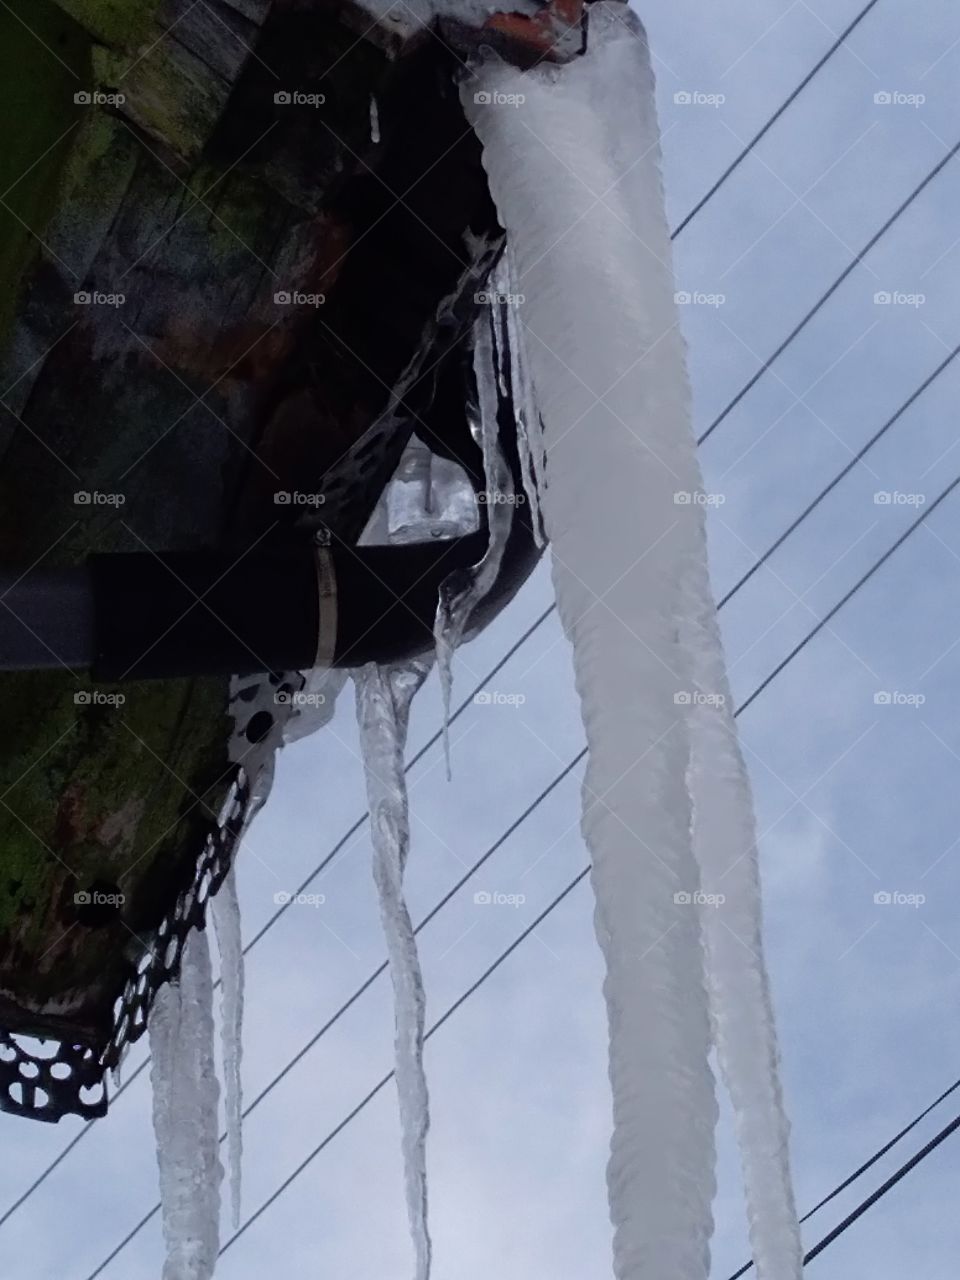 Icicle under roof